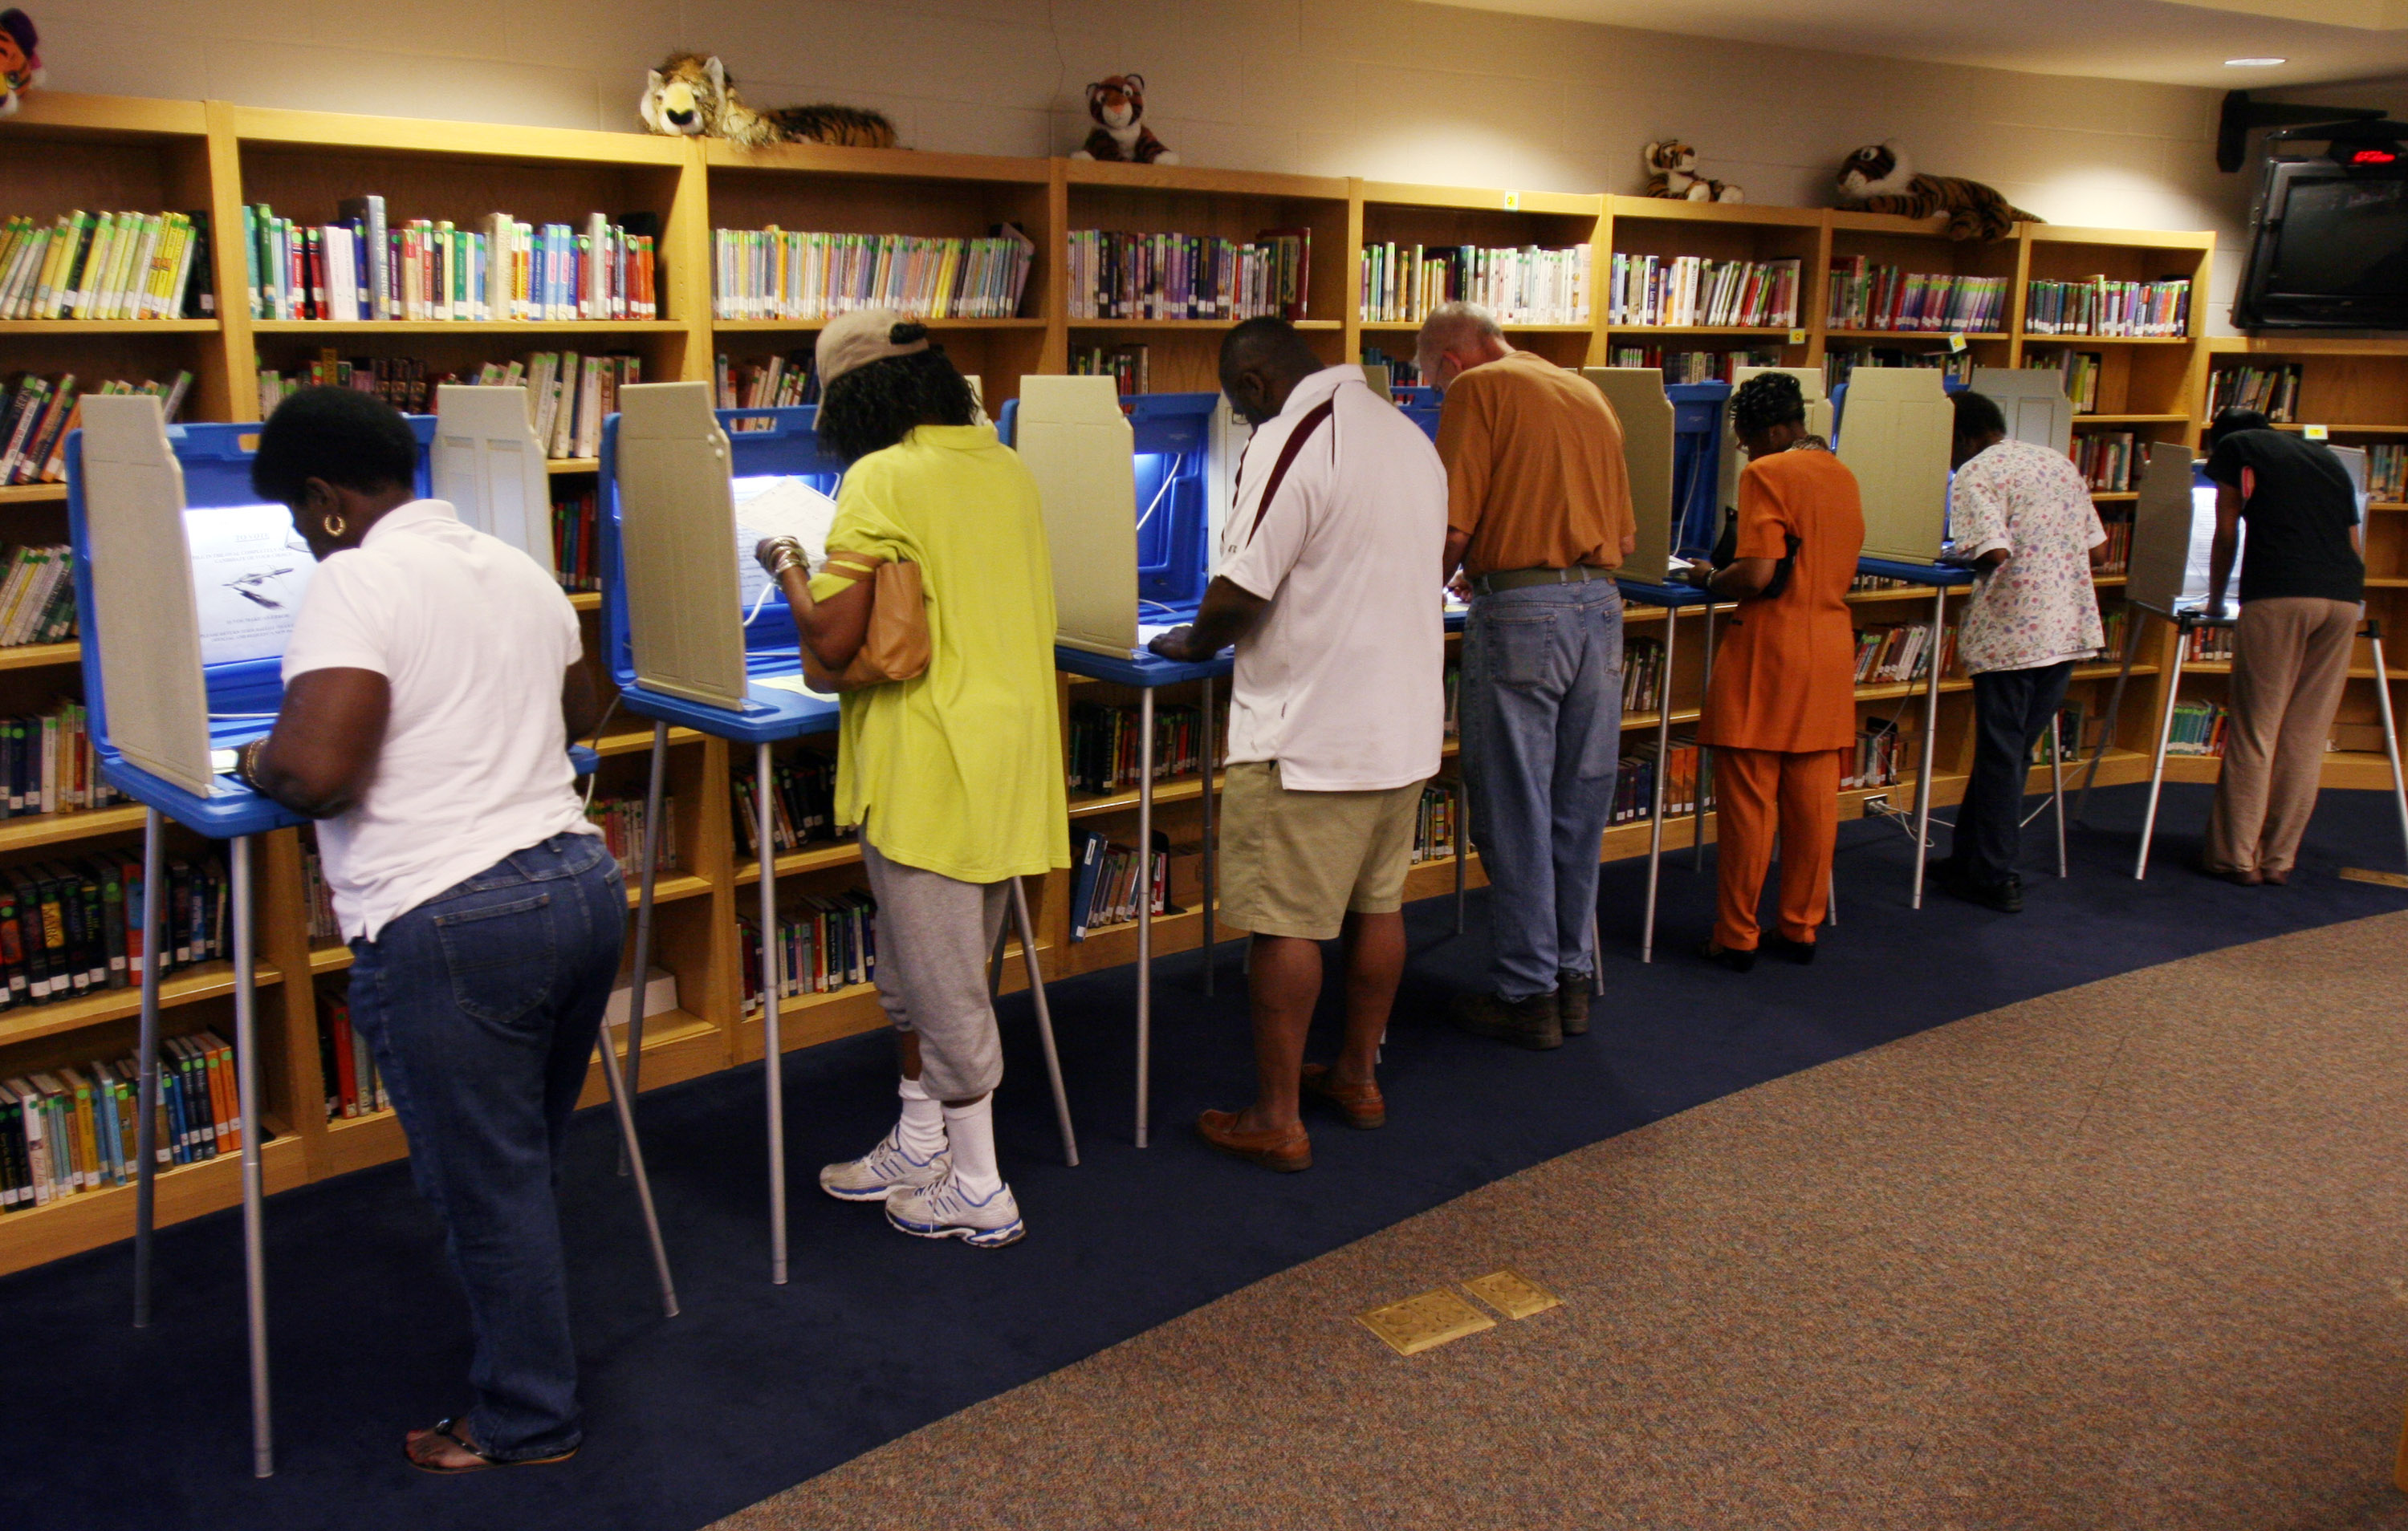 WILMINGTON, NC - MAY 6: Voters cast their ballots at the Williston Middle School polling station the morning of May 6, 2008 in Wilmington, North Carolina. Voters in Indiana and North Carolina have their primary polls May 6. (Photo by Logan Mock-Bunting/Getty Images)